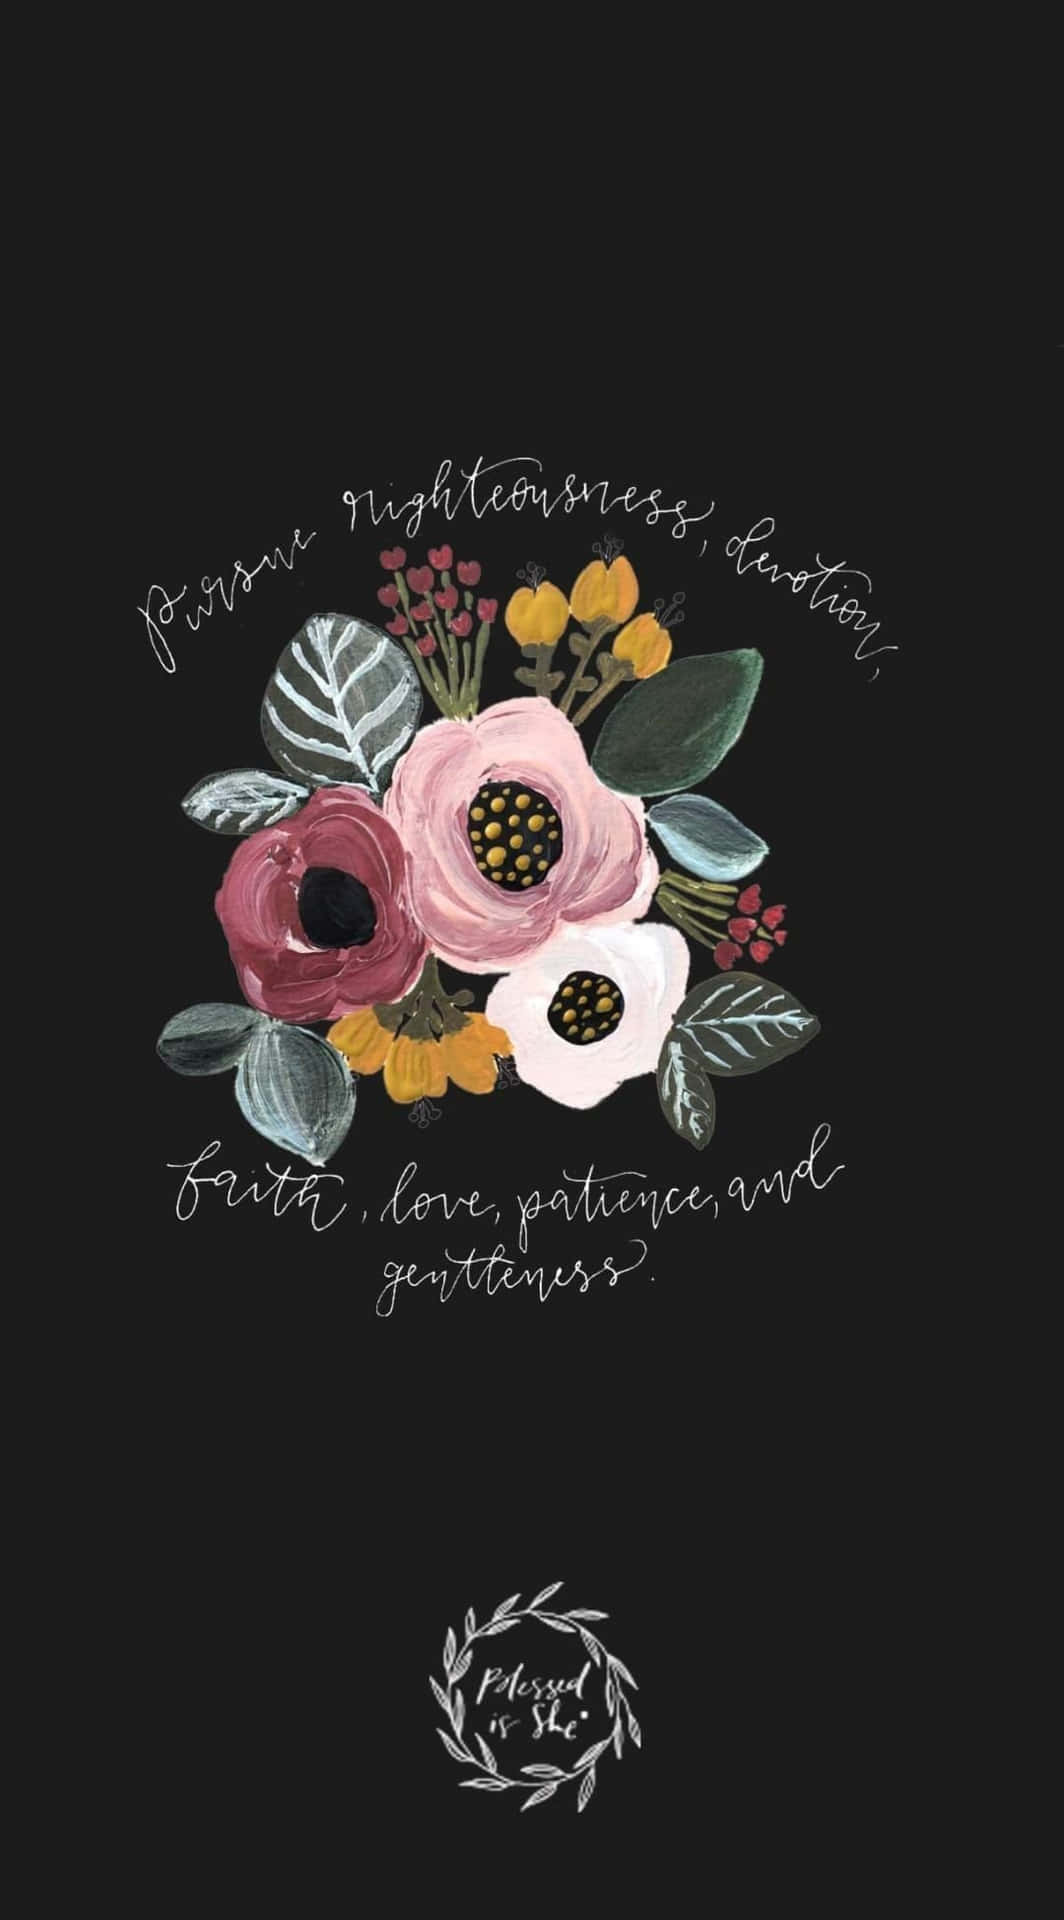 Cool Christian Quote With Flowers Background